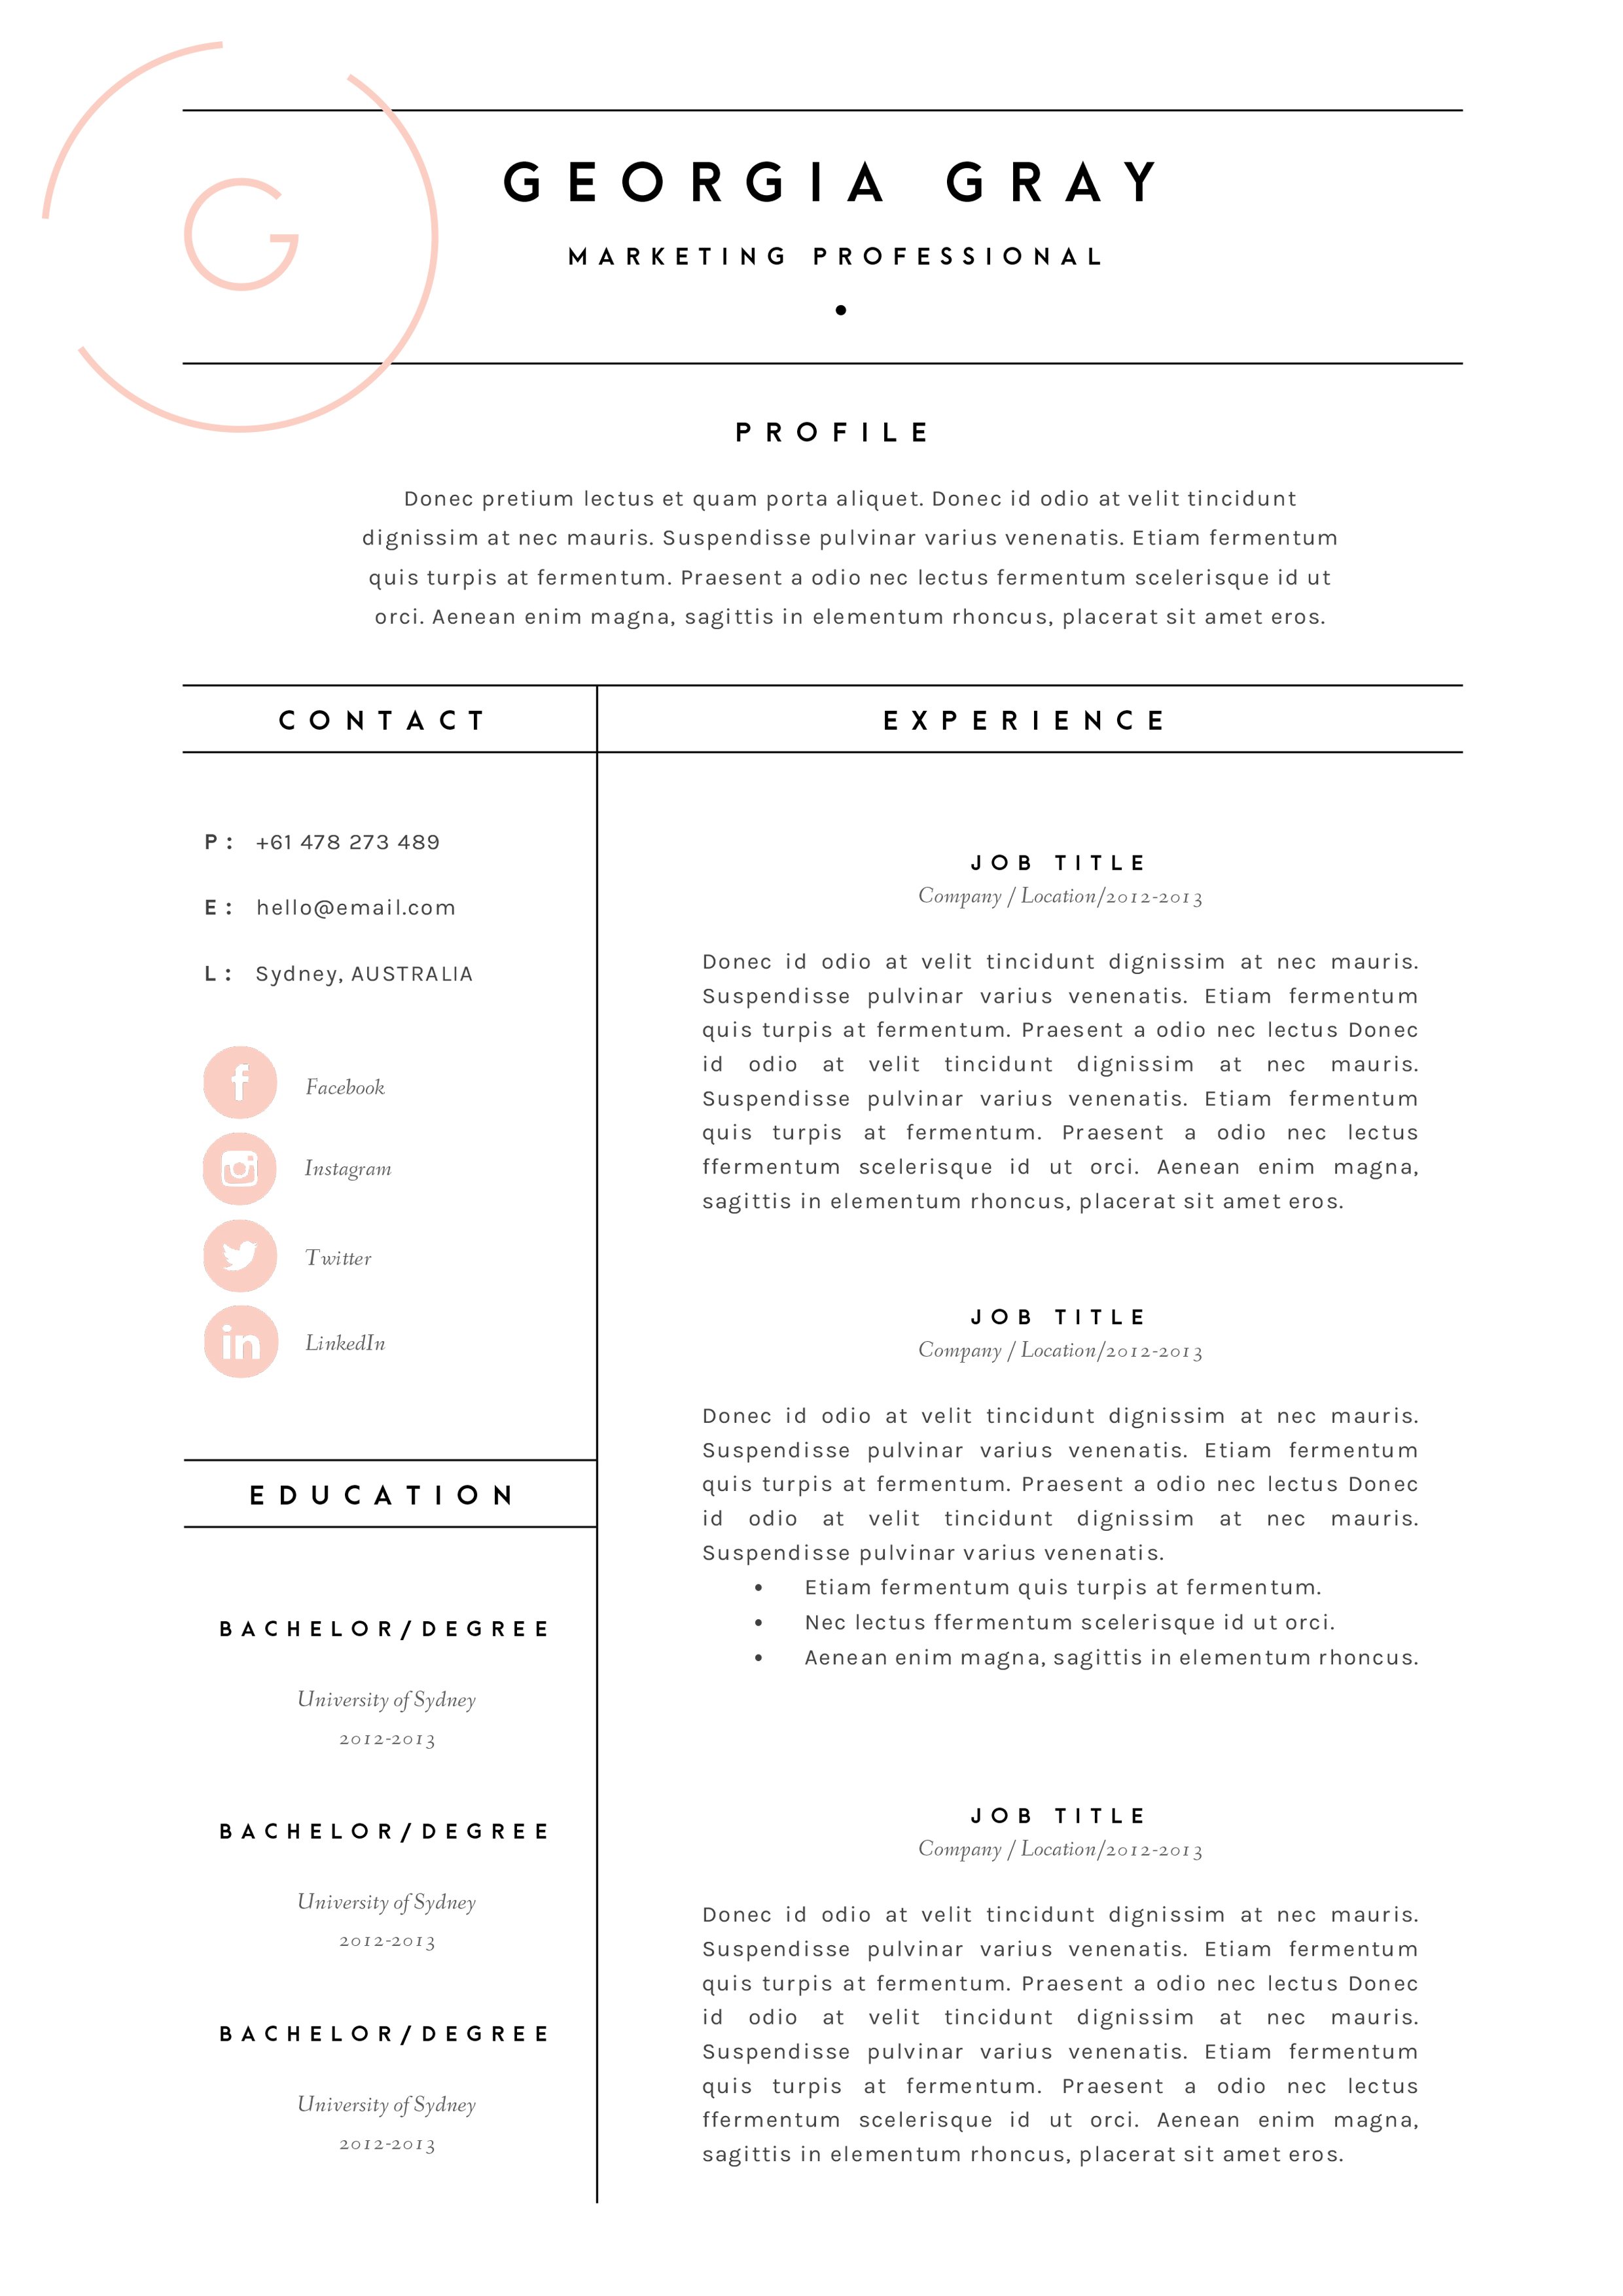 Professional resume with a red and black color scheme.